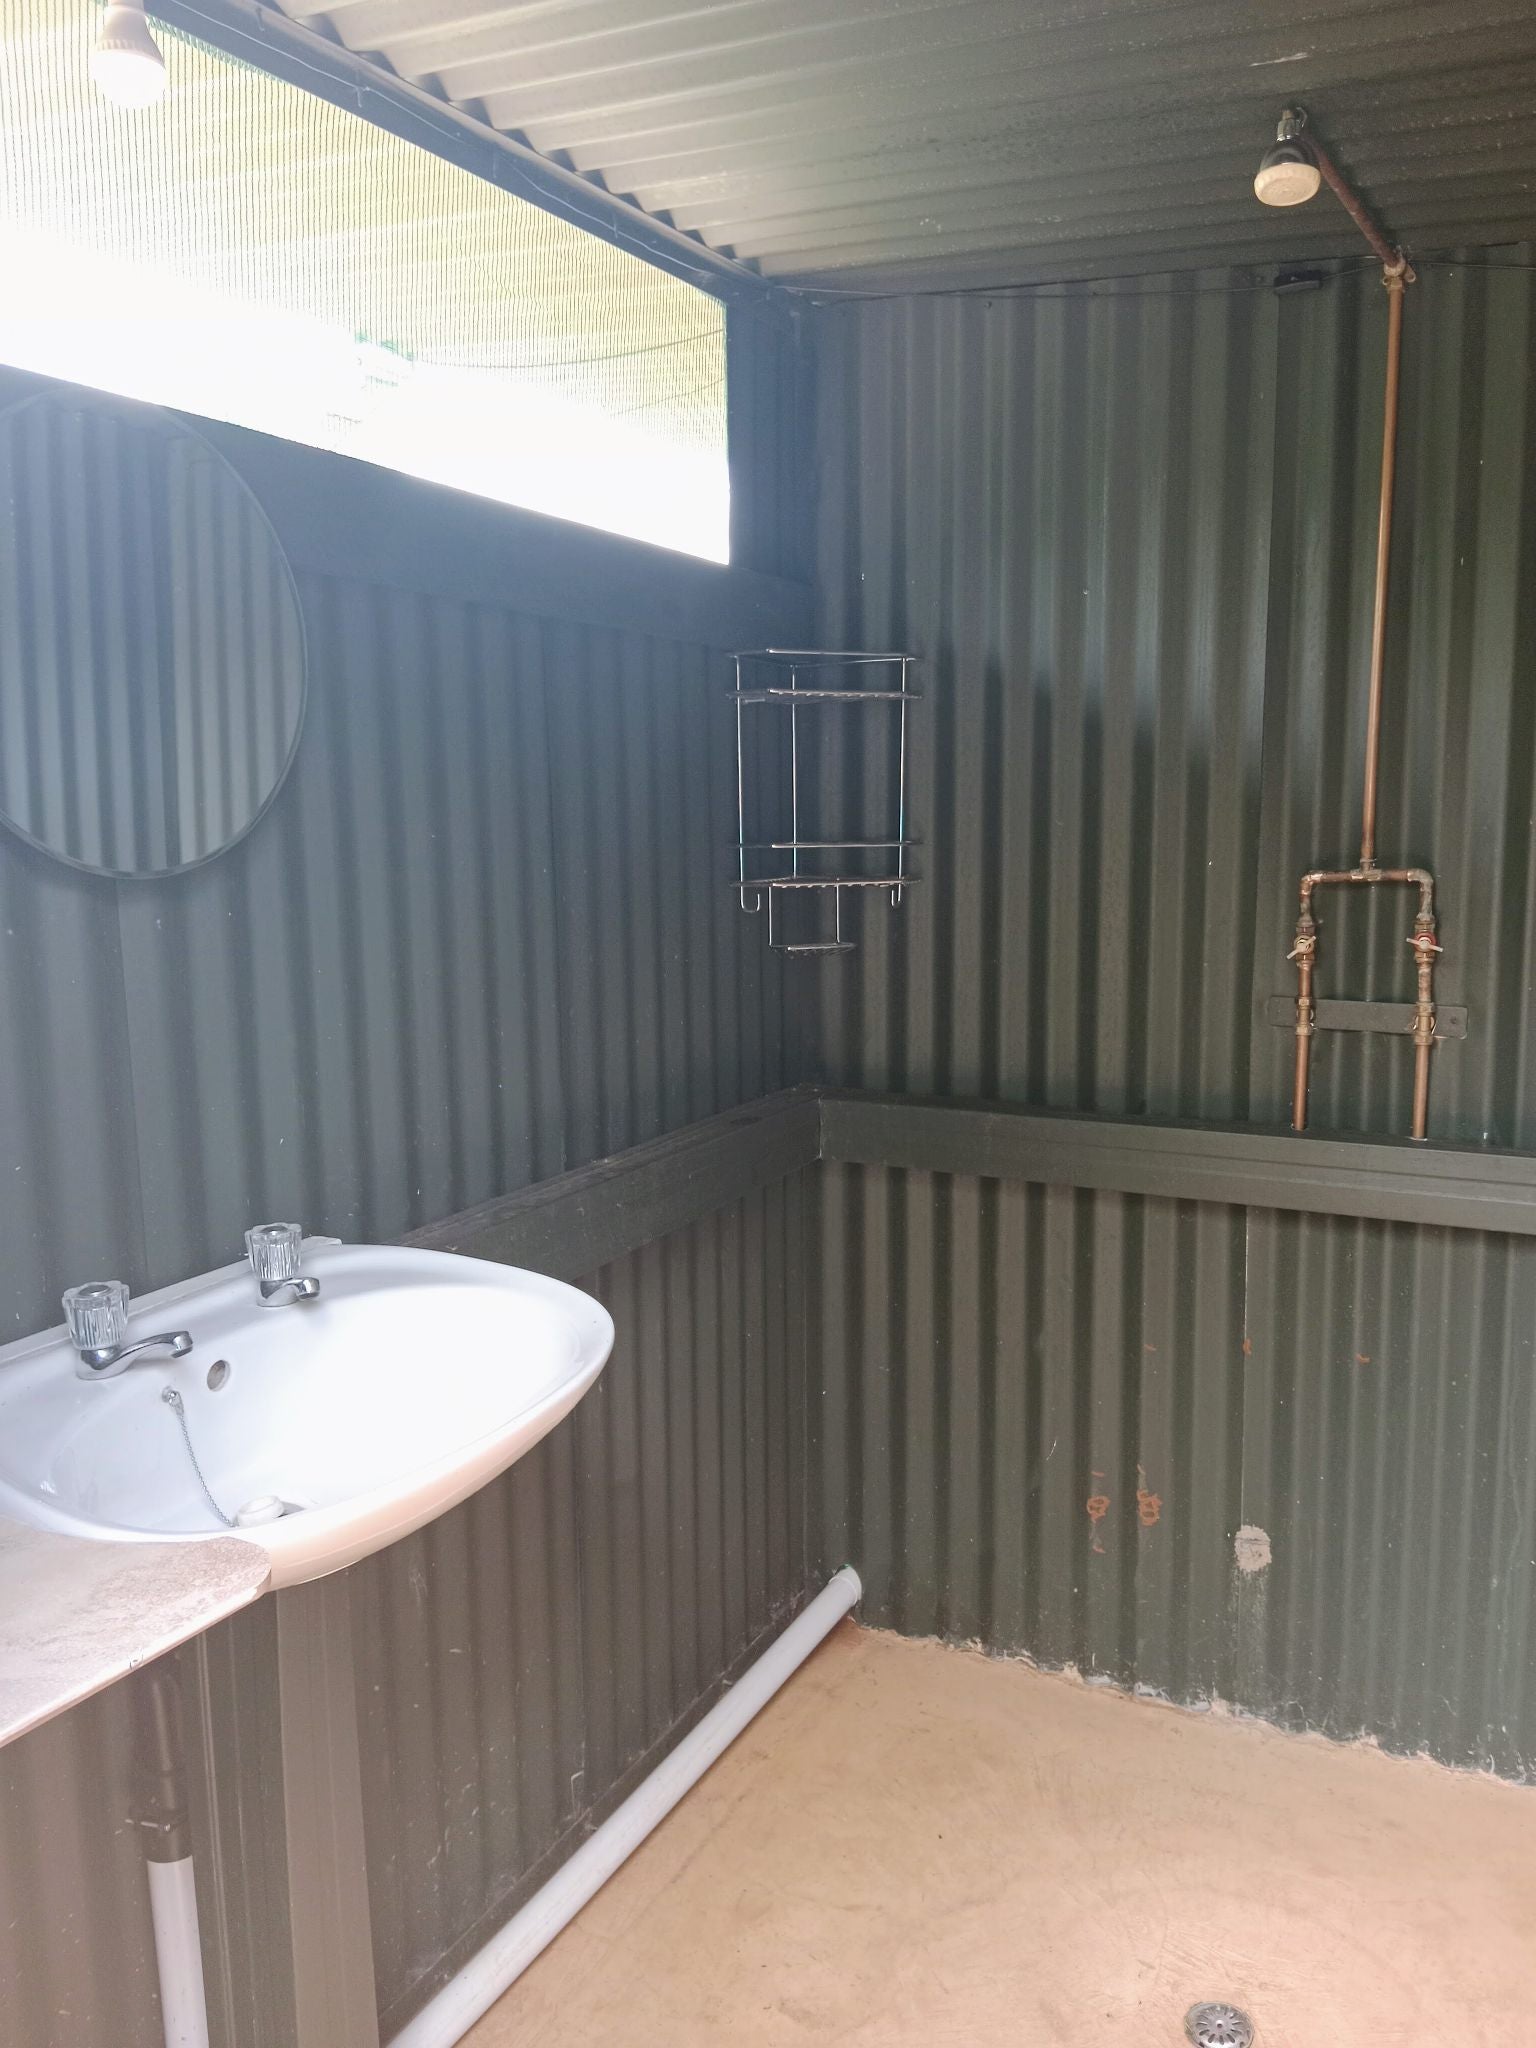 Evergreen River Guest Farm Groot Marico Groot Marico North West Province South Africa Shipping Container, Bathroom